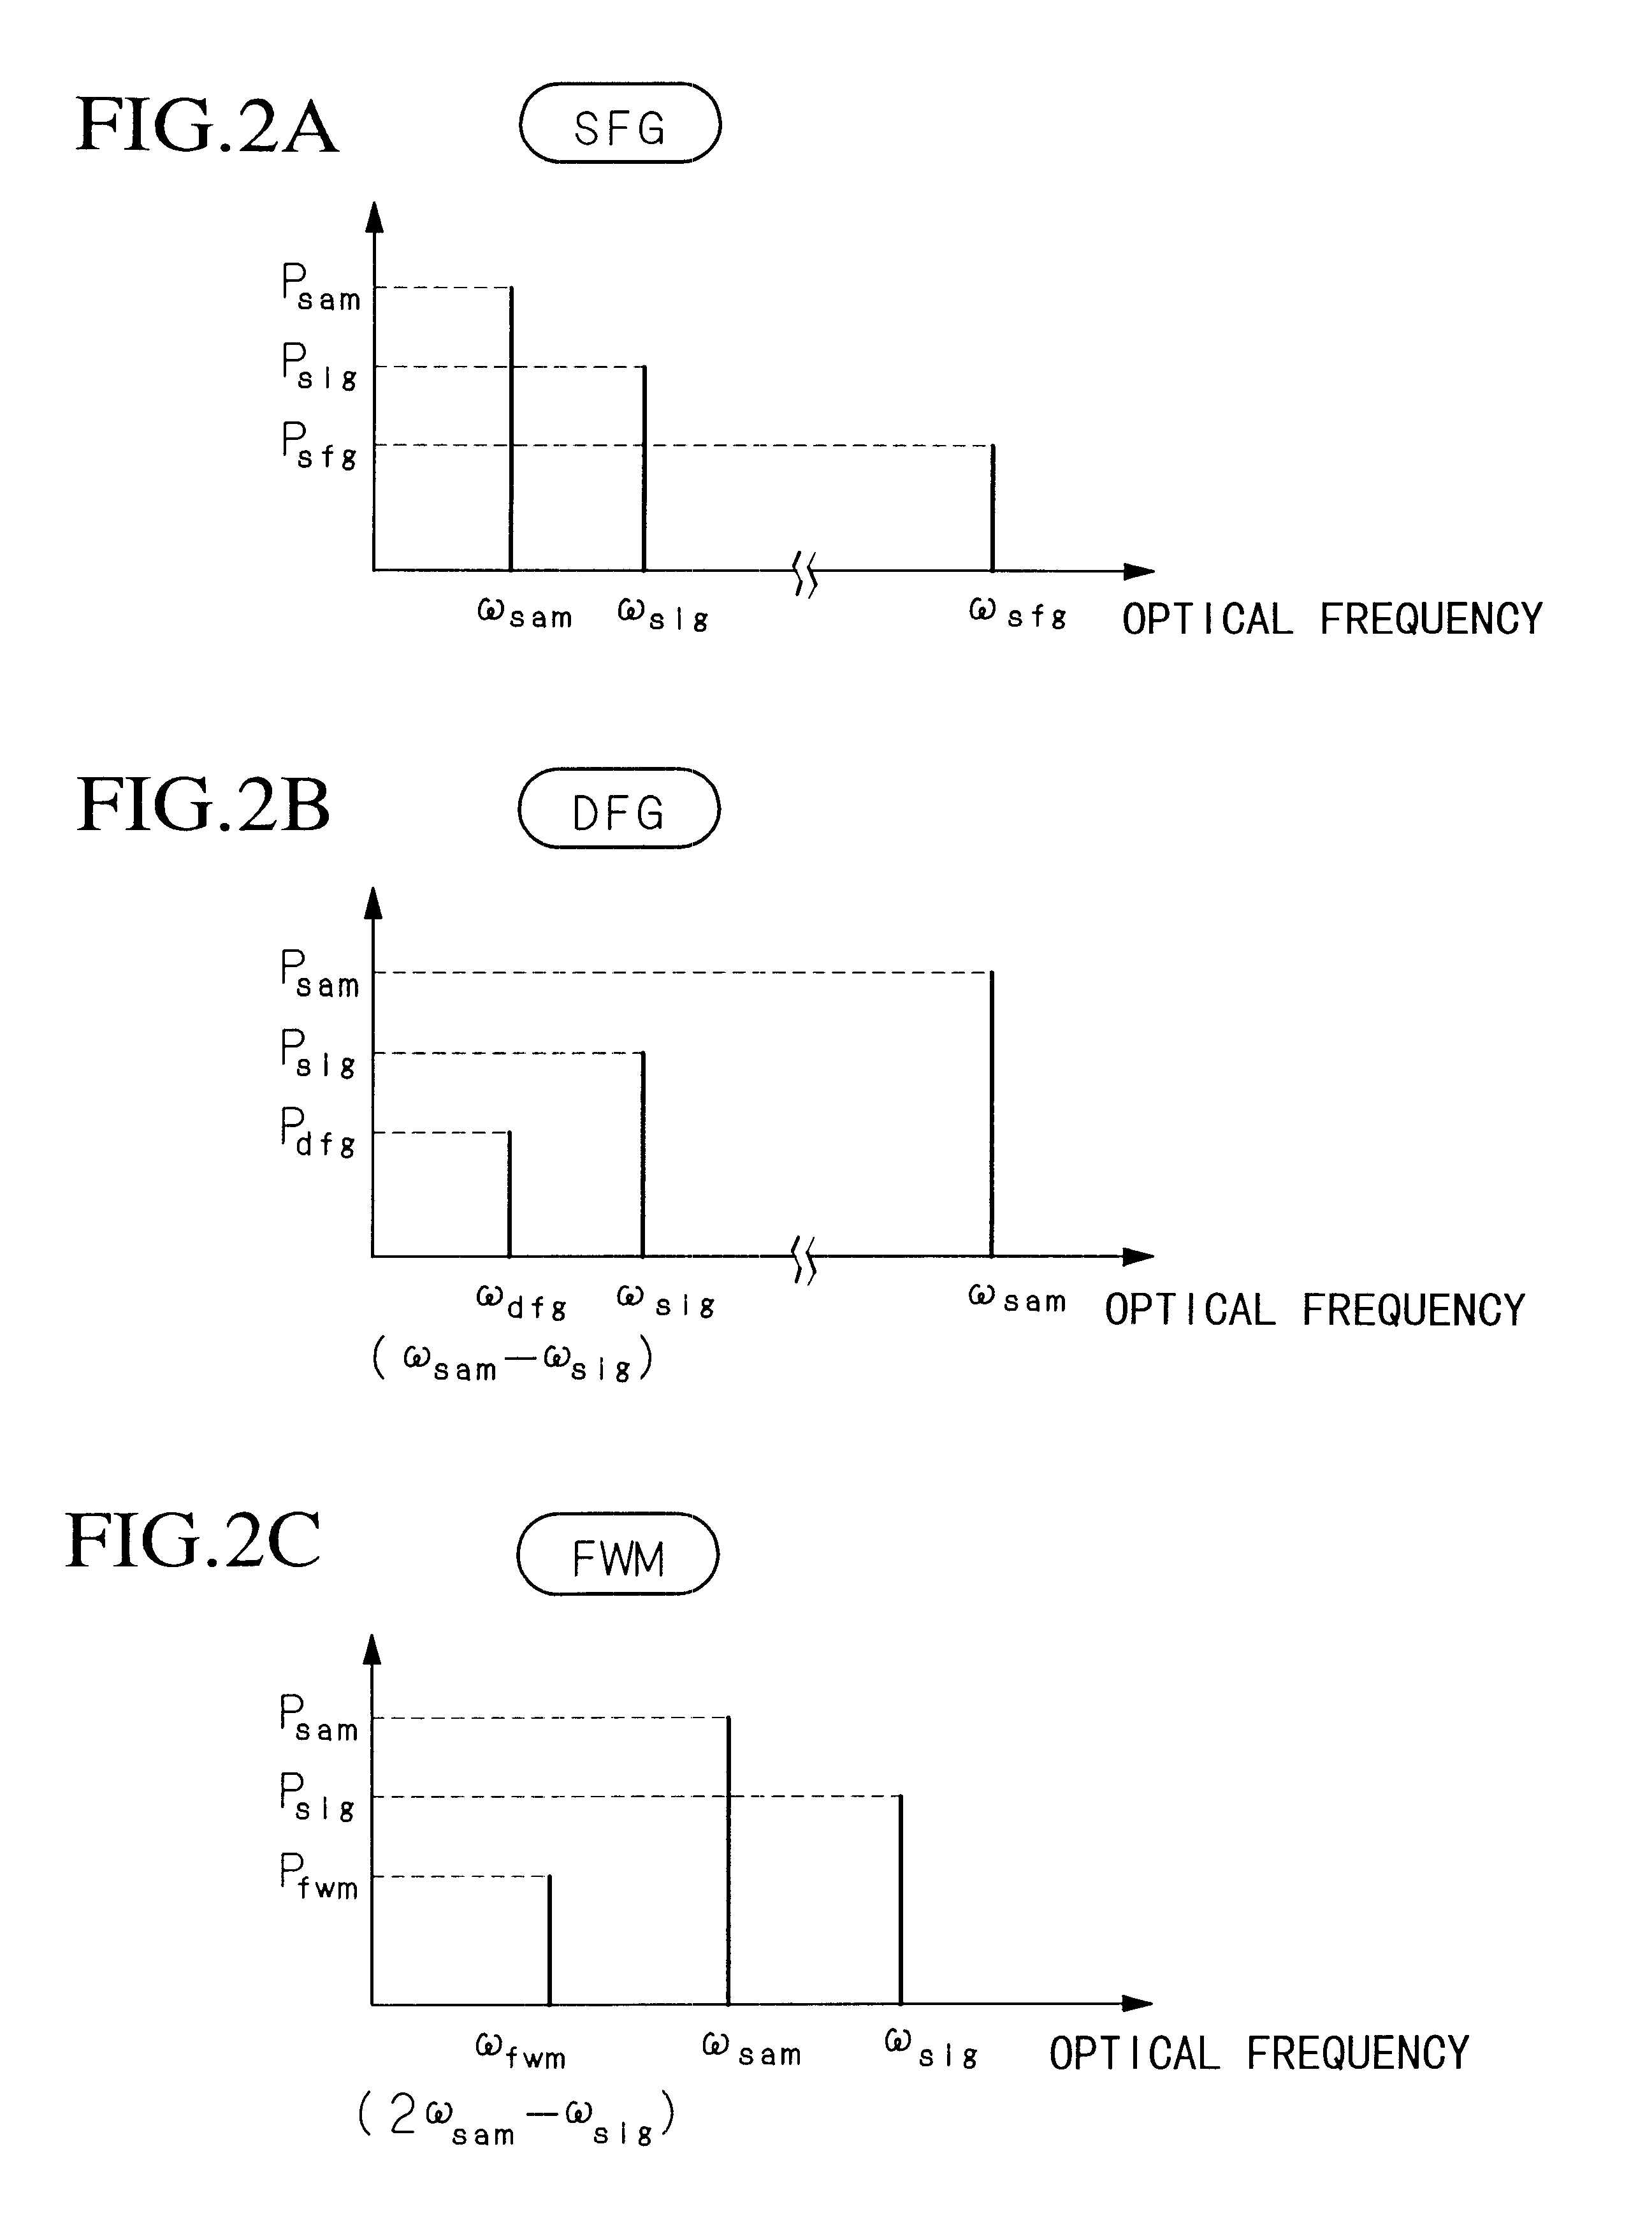 System for monitoring quality of optical signals having different bit rates